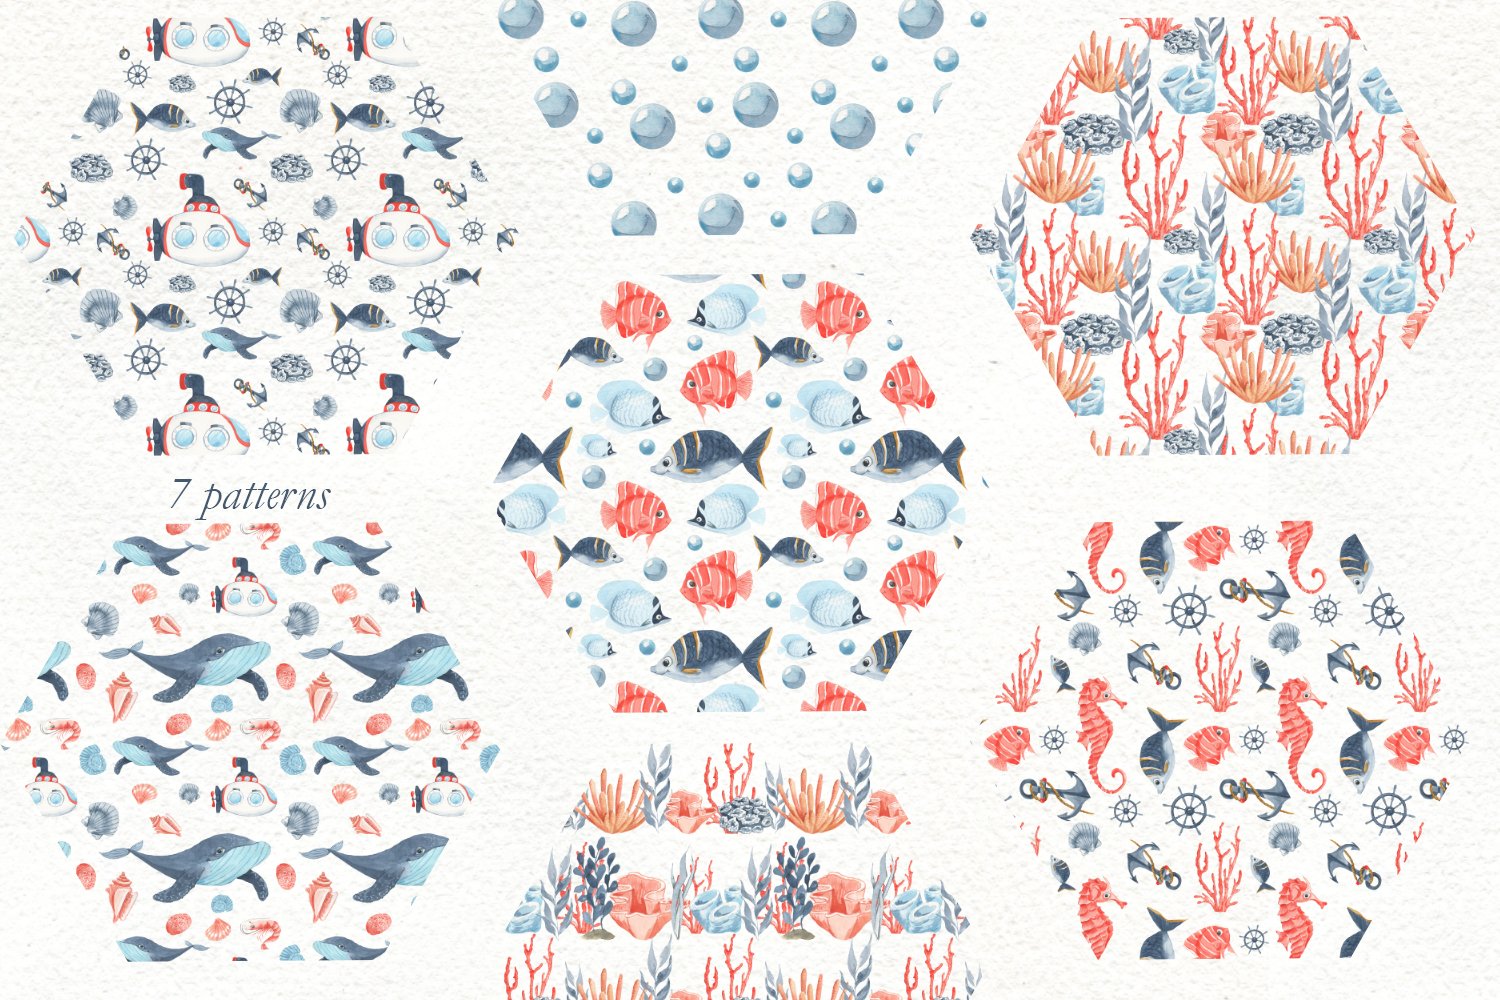 There are 7 seamless patterns.